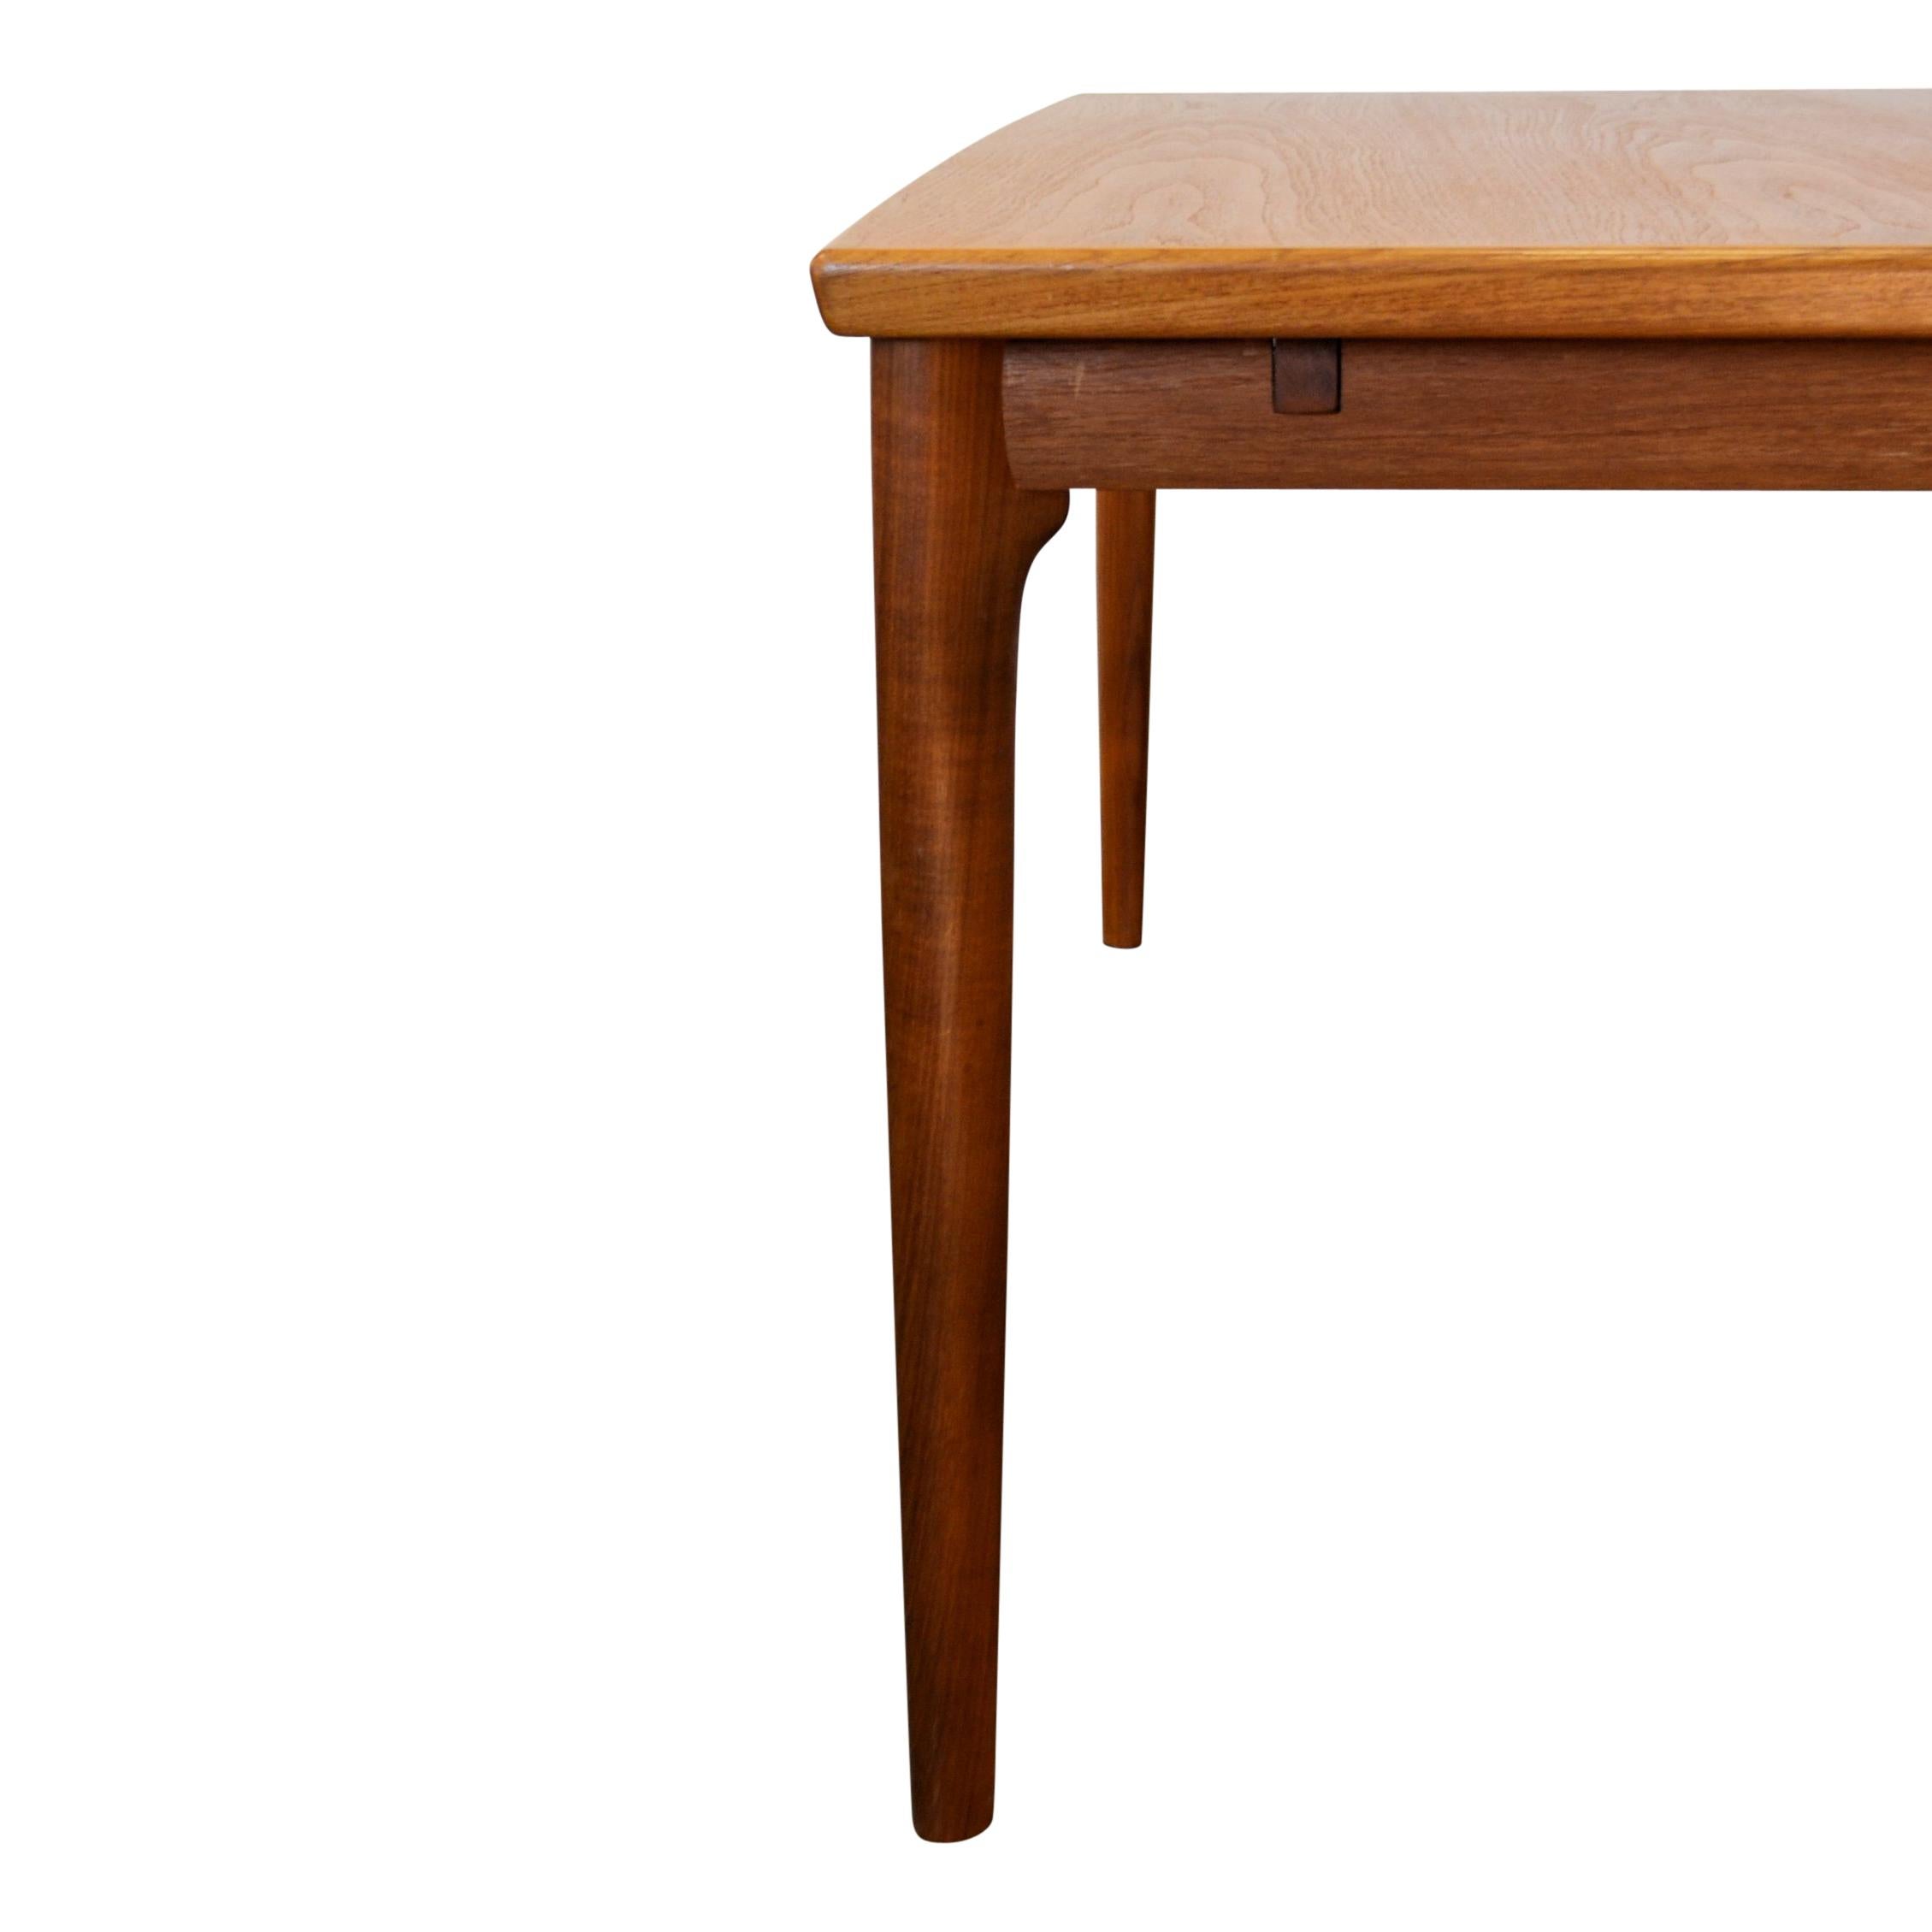 Mid-20th Century Grete Jalk Extendable Teak Dining Table For Sale